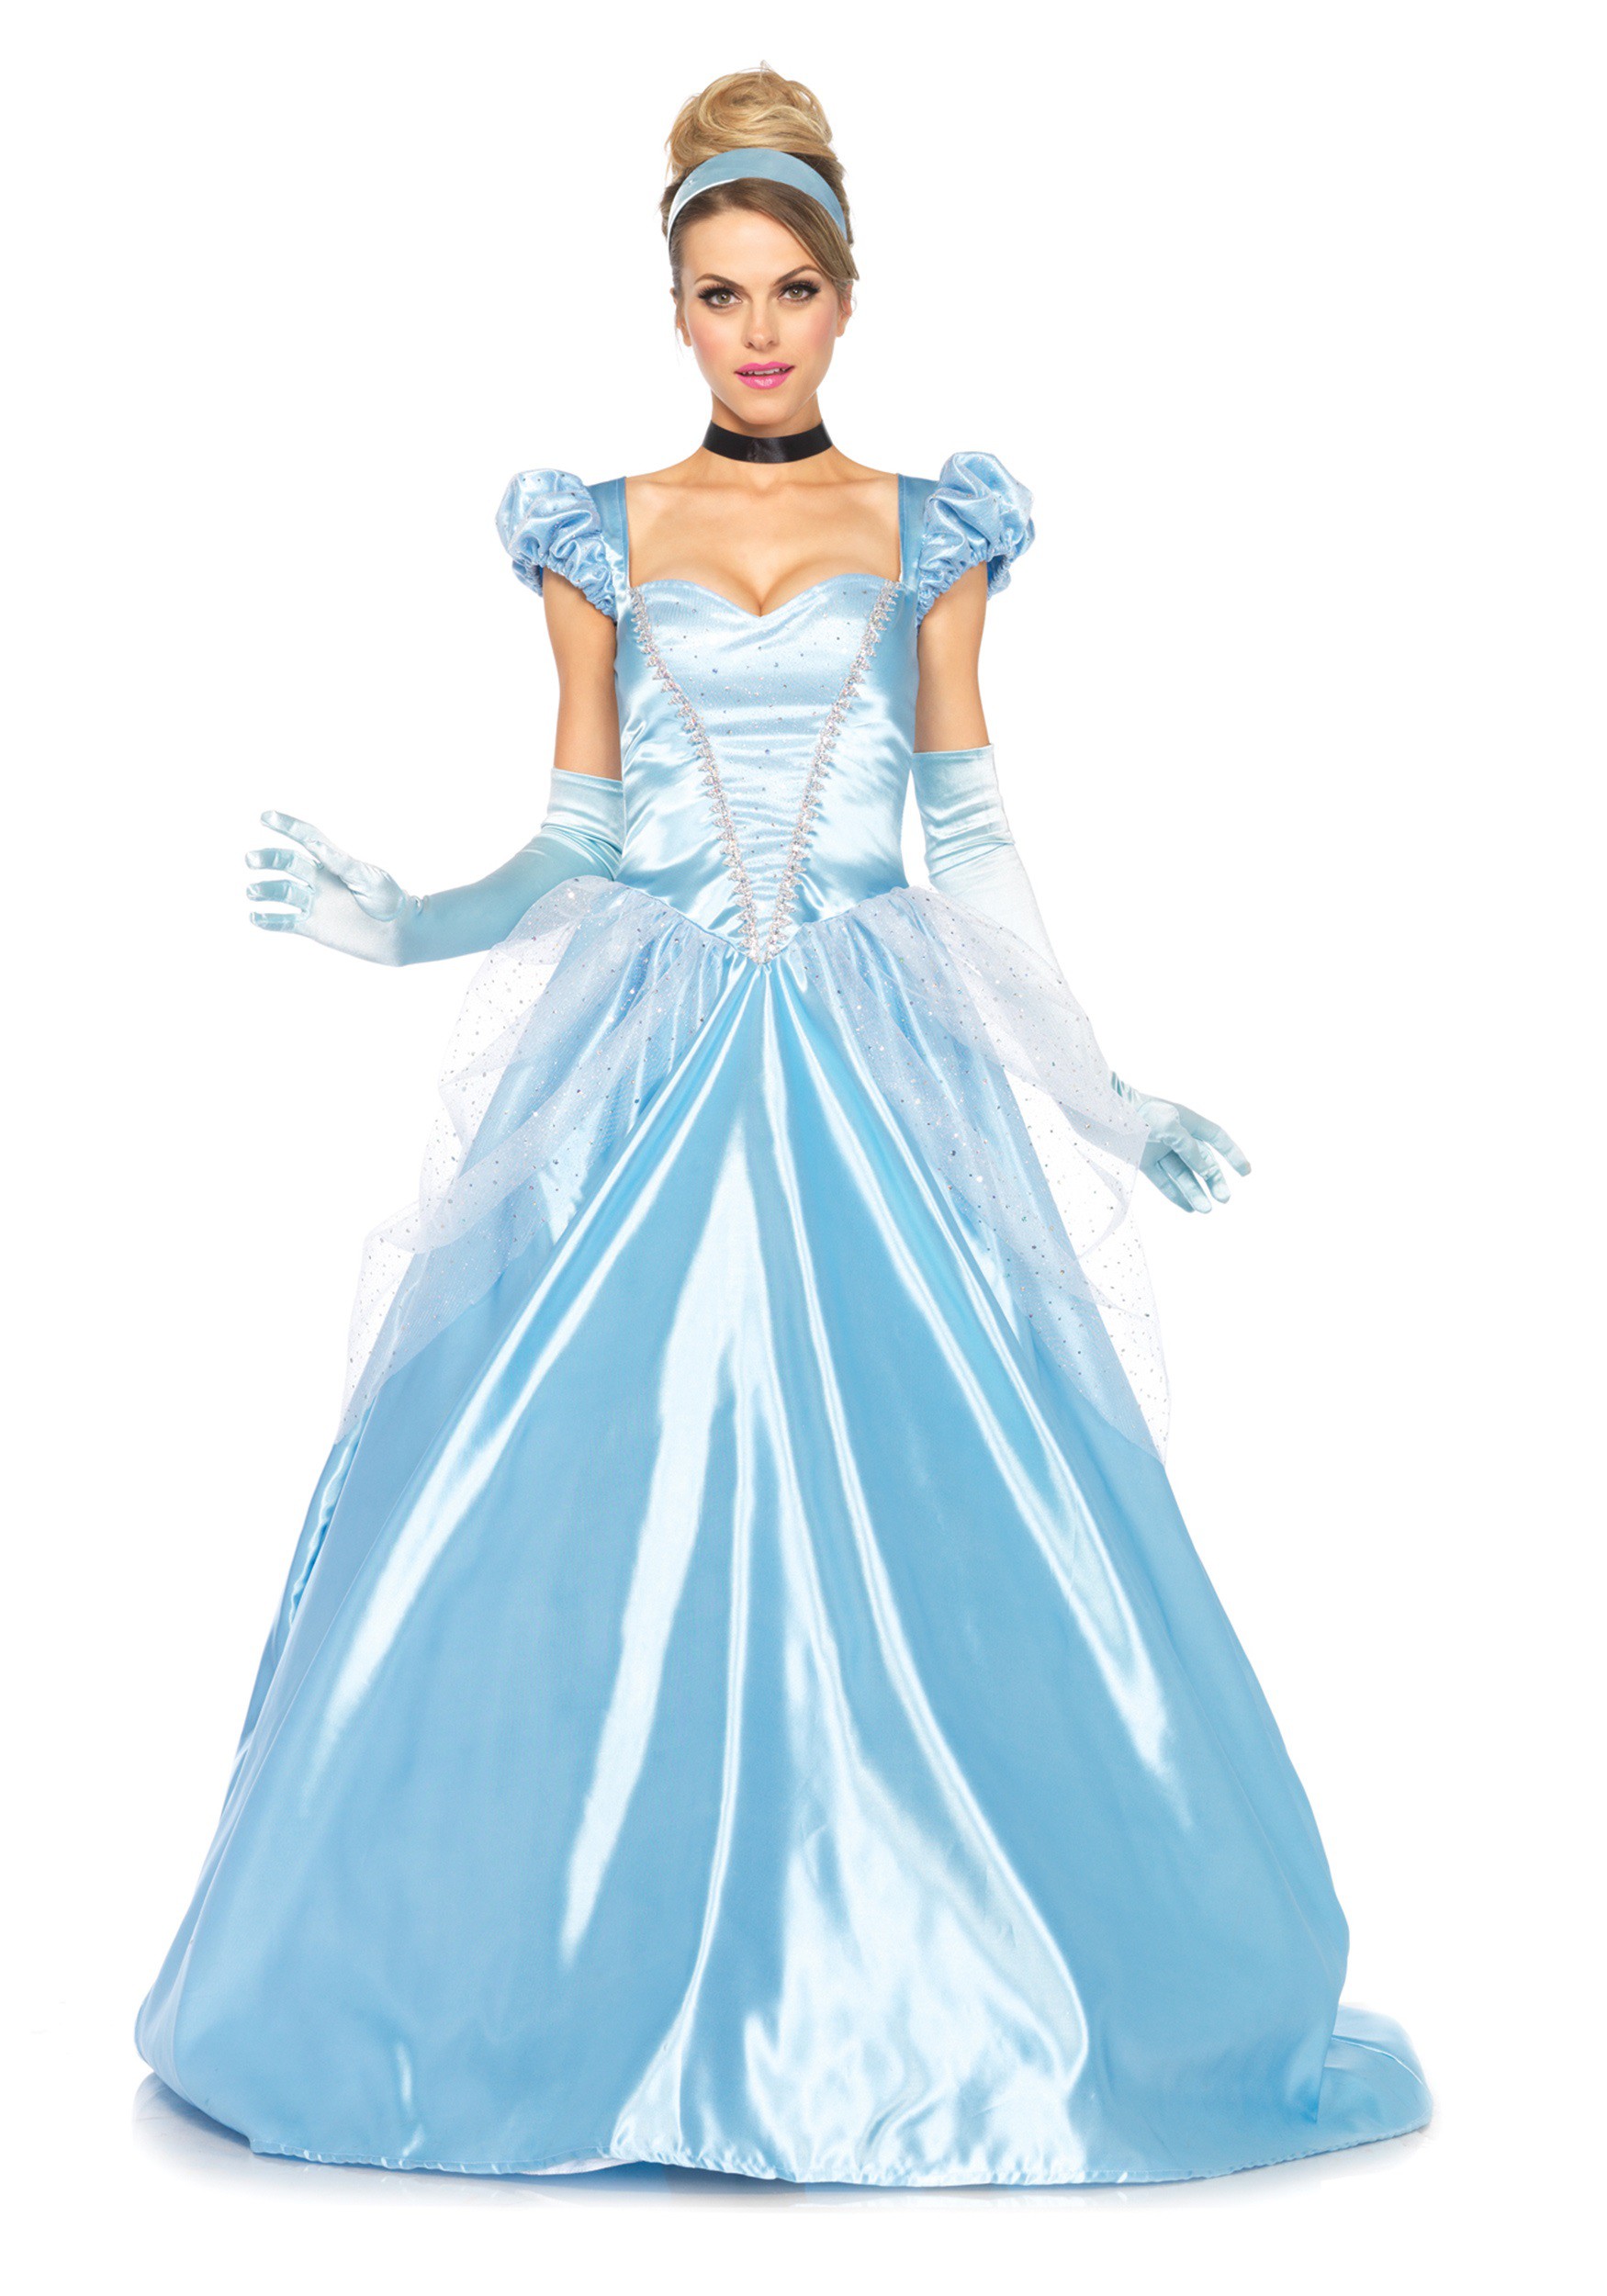 Cinderella Costume Classic Full Length Gown For Women